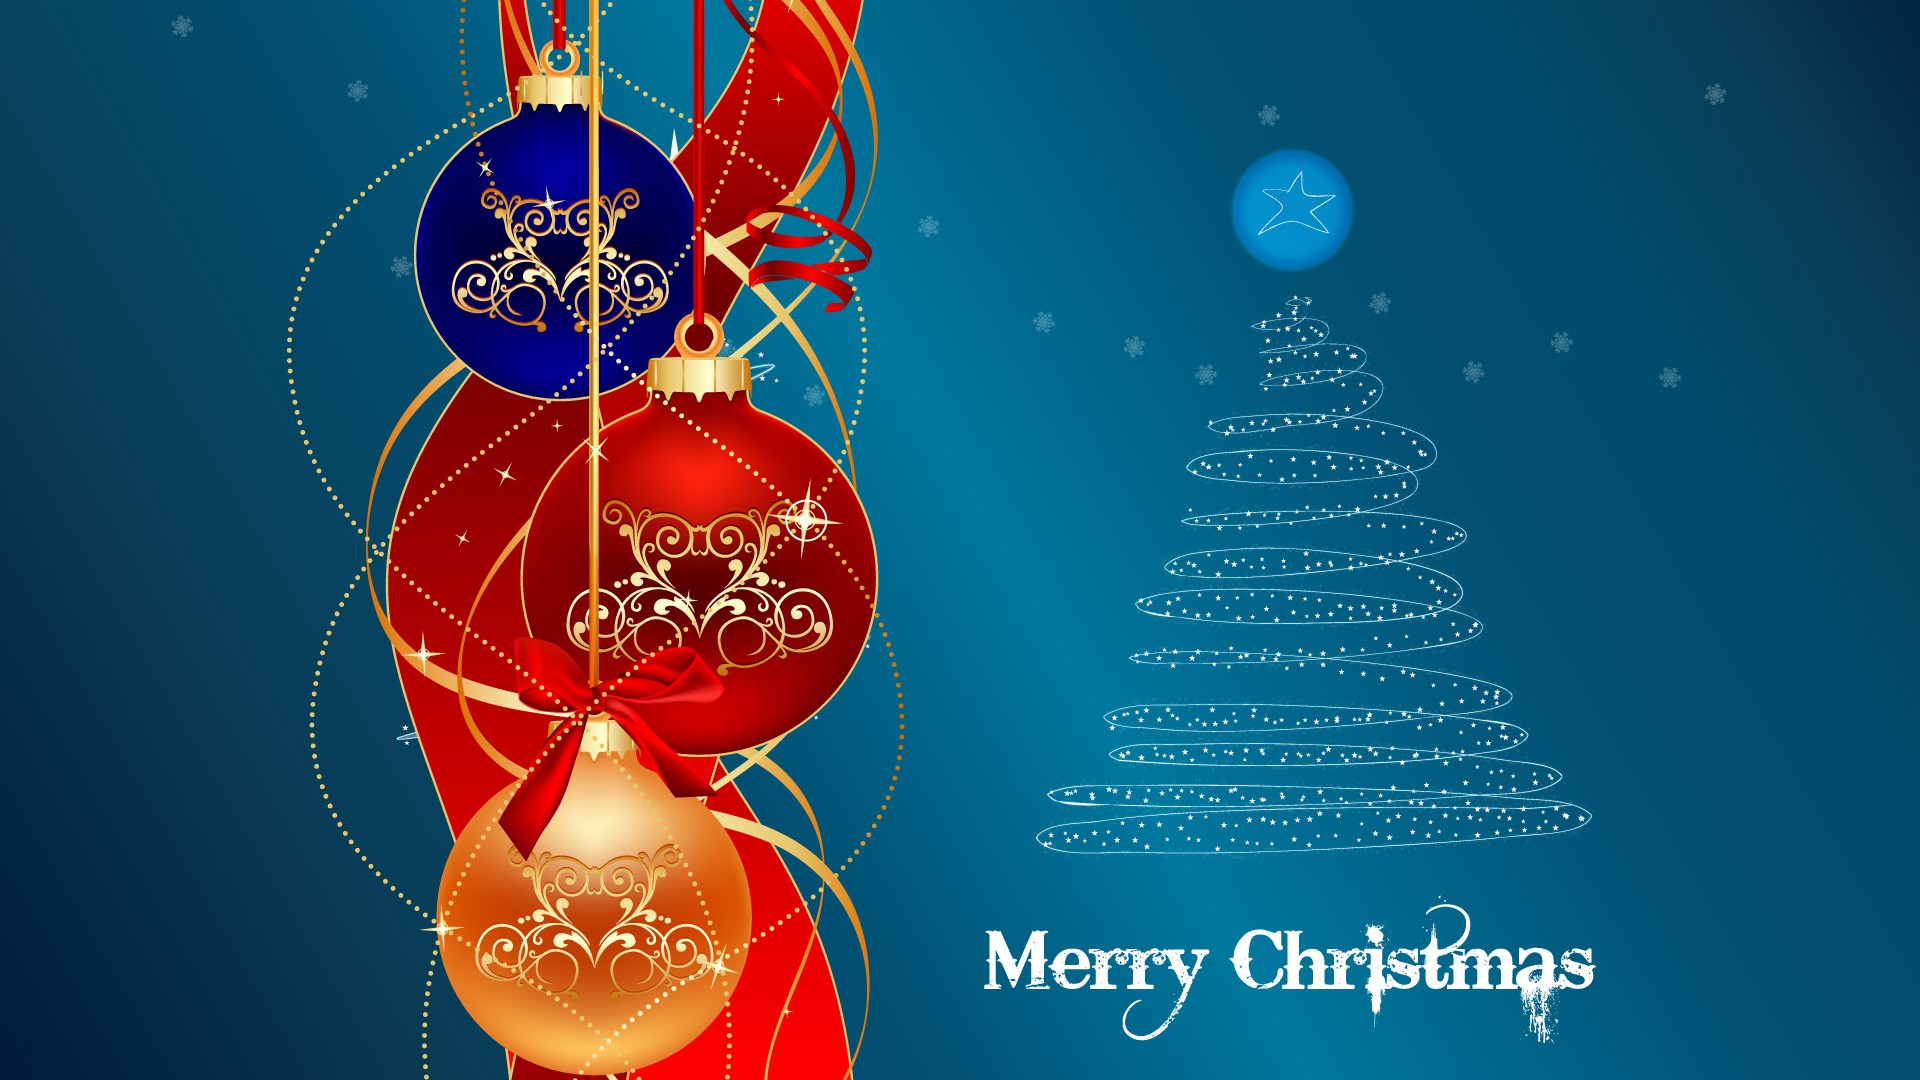 Exquisite Christmas Theme HD Wallpapers #25 - 1920x1080